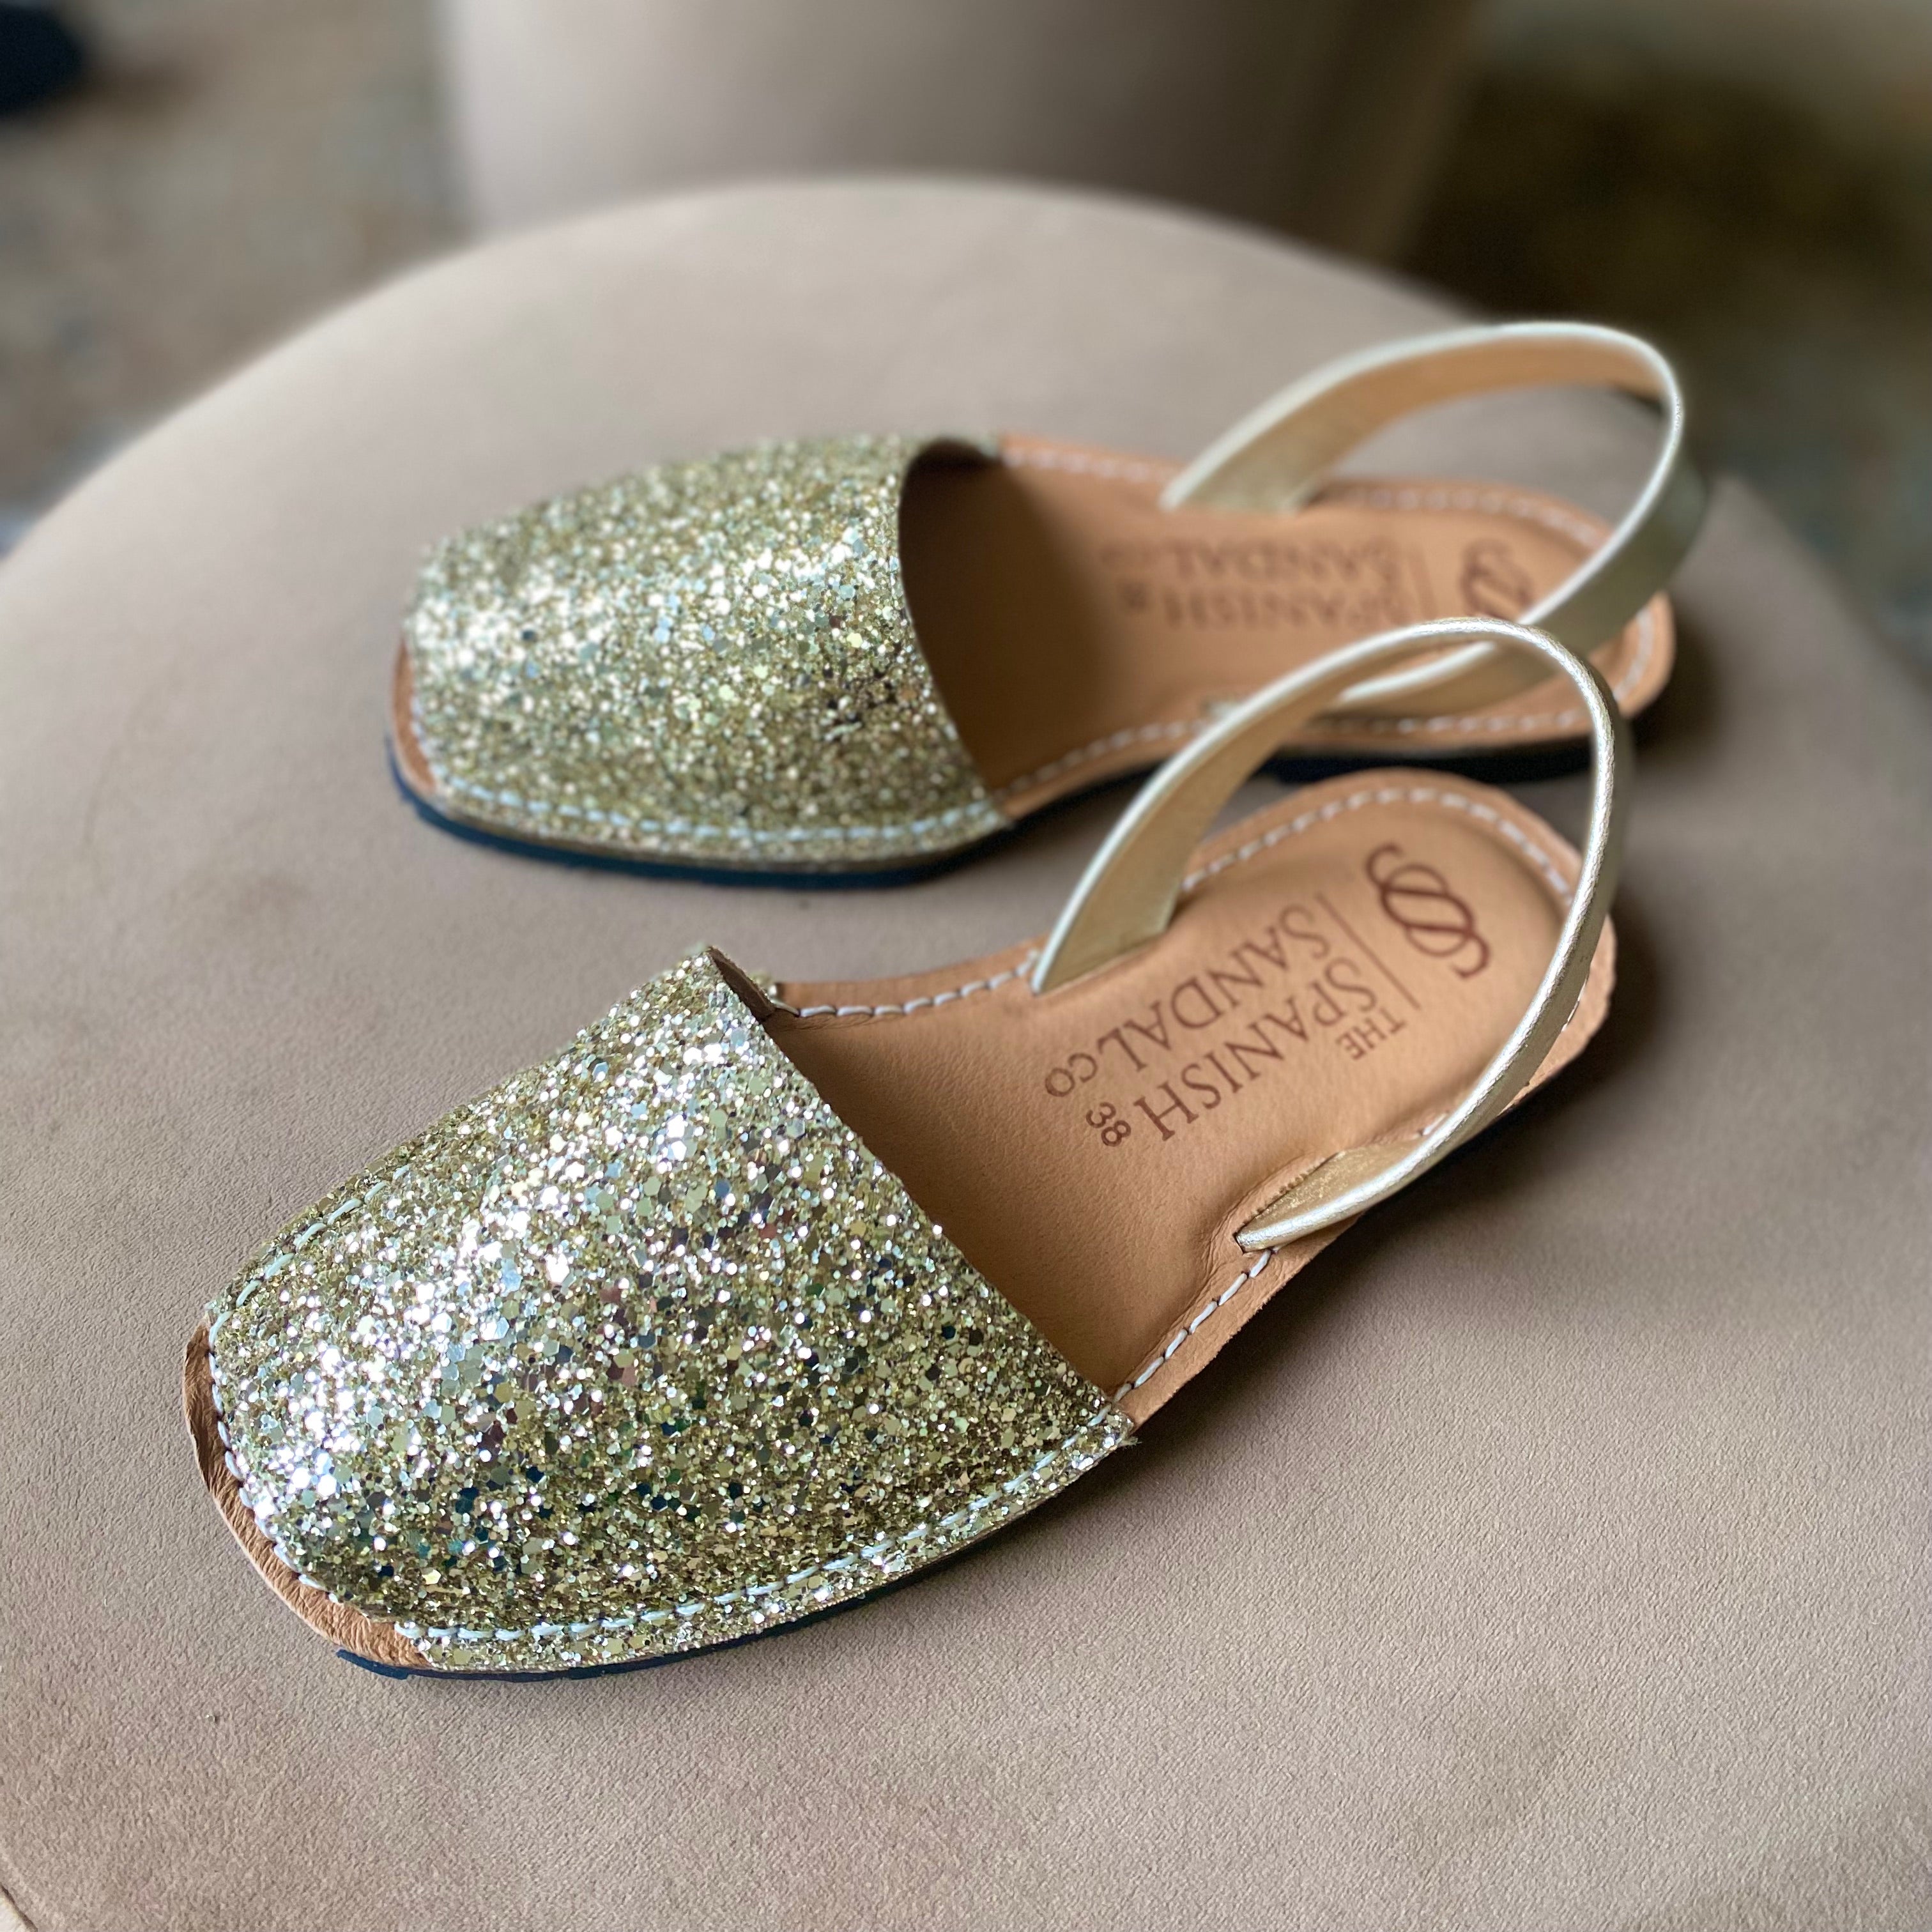 Gold sparkly flat sandals